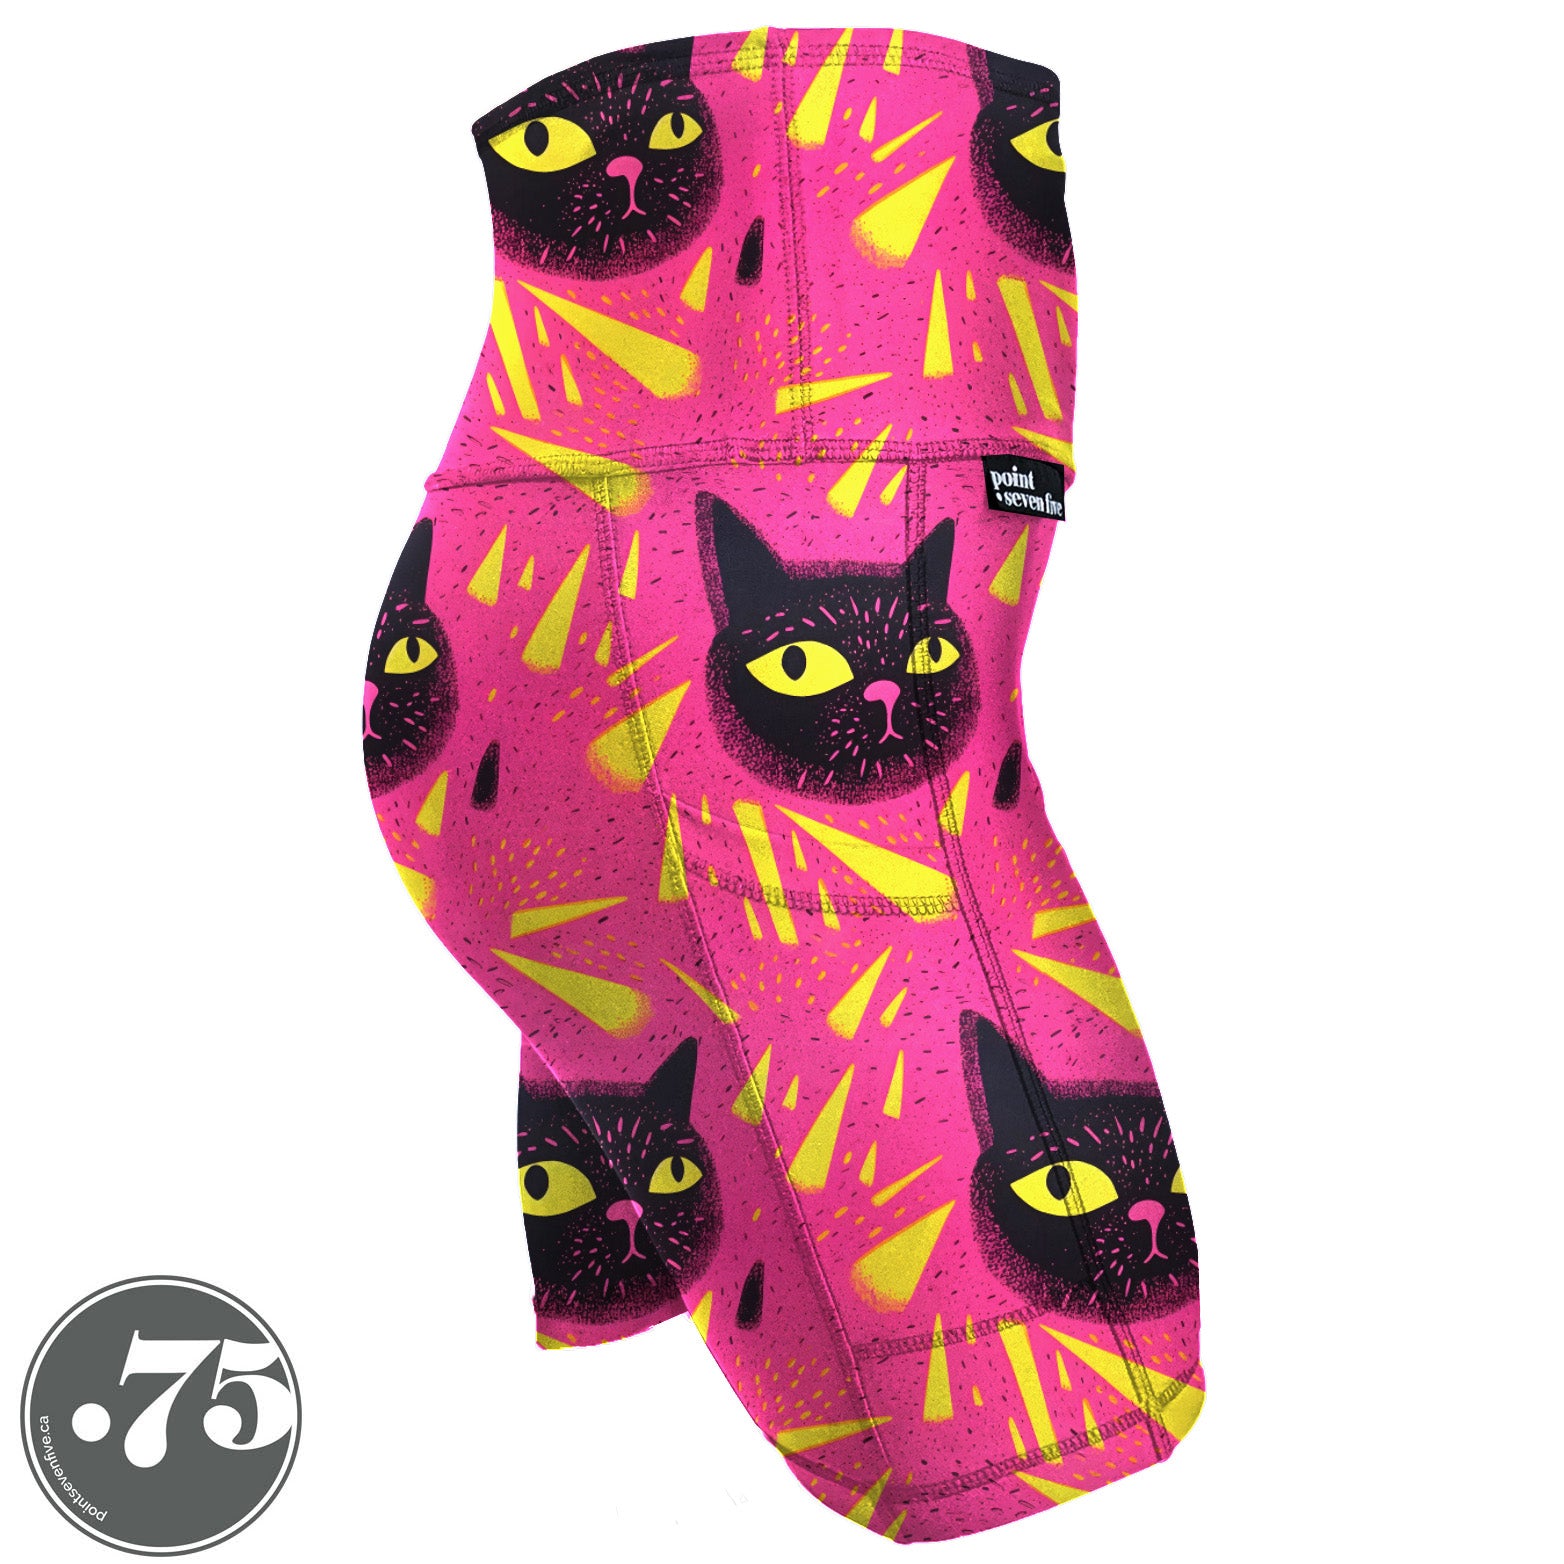 High-waisted, spandex Skate Length (bike short) pocket shorts. The fabric has a bright pink background with yellow triangle shapes and large hand drawn cat heads with yellow eyes.